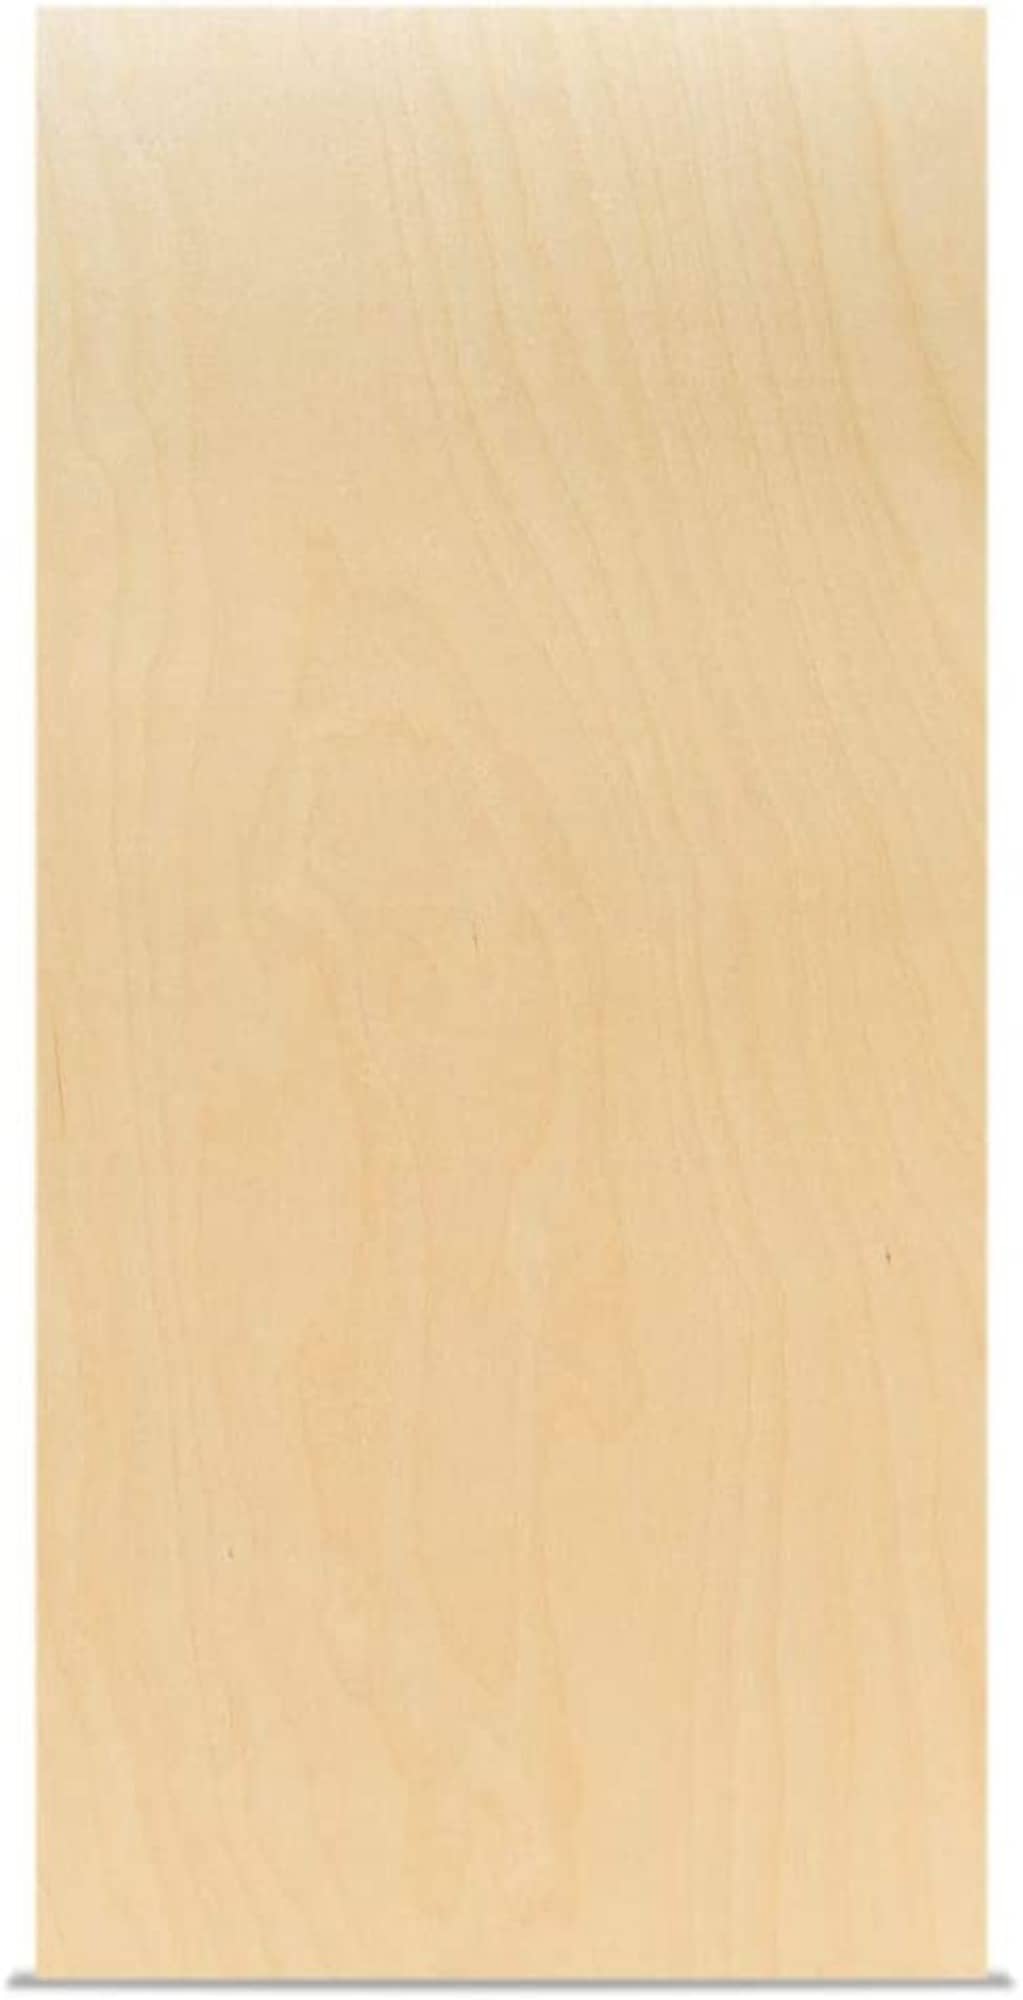  Baltic Birch Plywood, 3 mm 1/8 x 10 x 10 Inch Craft Wood, Box  of 16 B/BB Grade Baltic Birch Sheets, Perfect for Laser, CNC Cutting and  Wood Burning, by Woodpeckers 